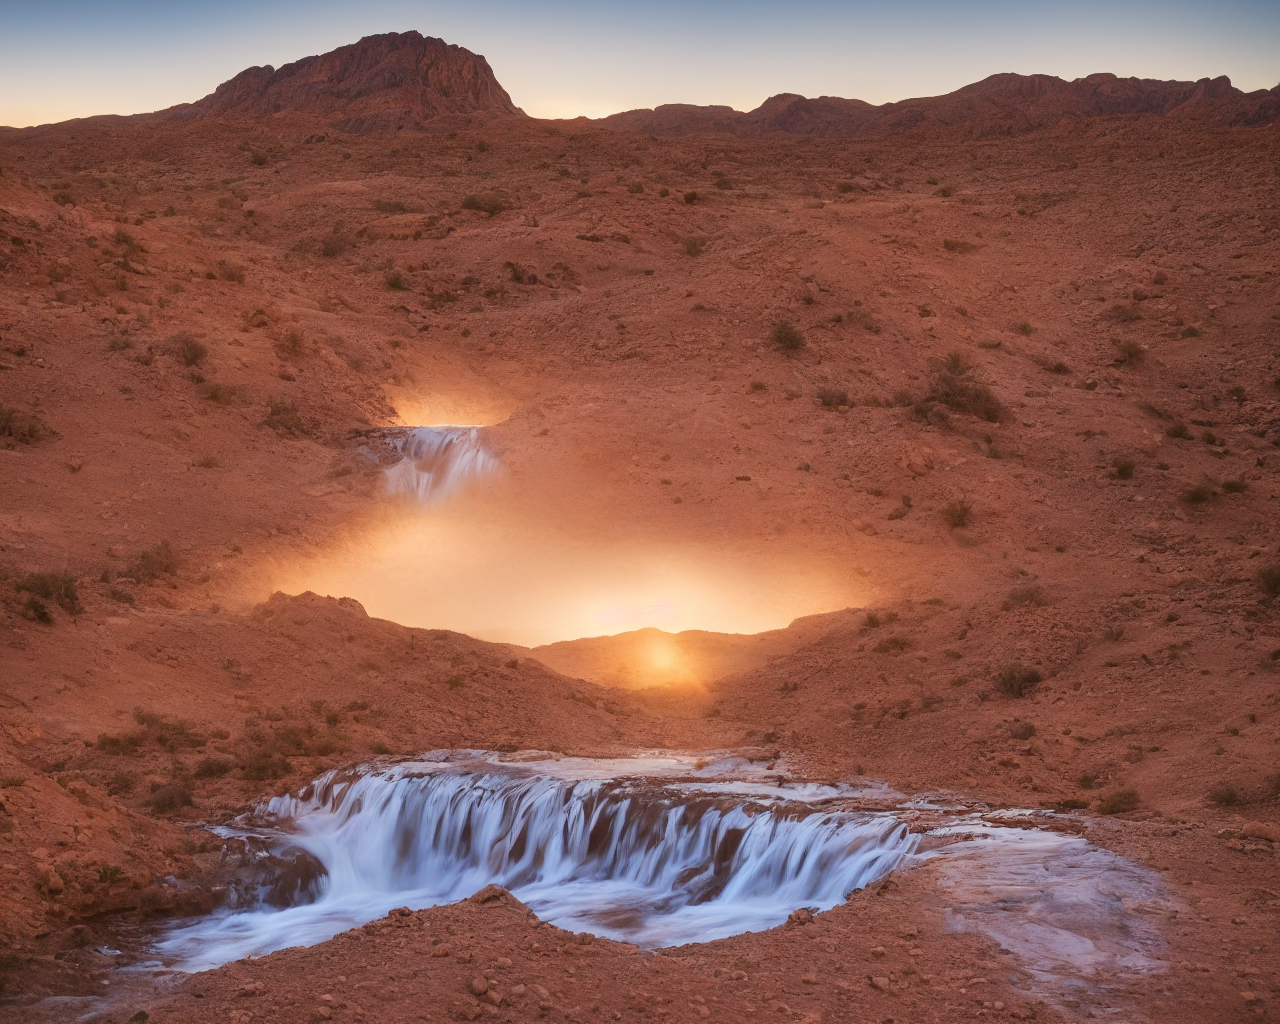 00152-35-waterfall_in_the_dessert_at_sunset.png